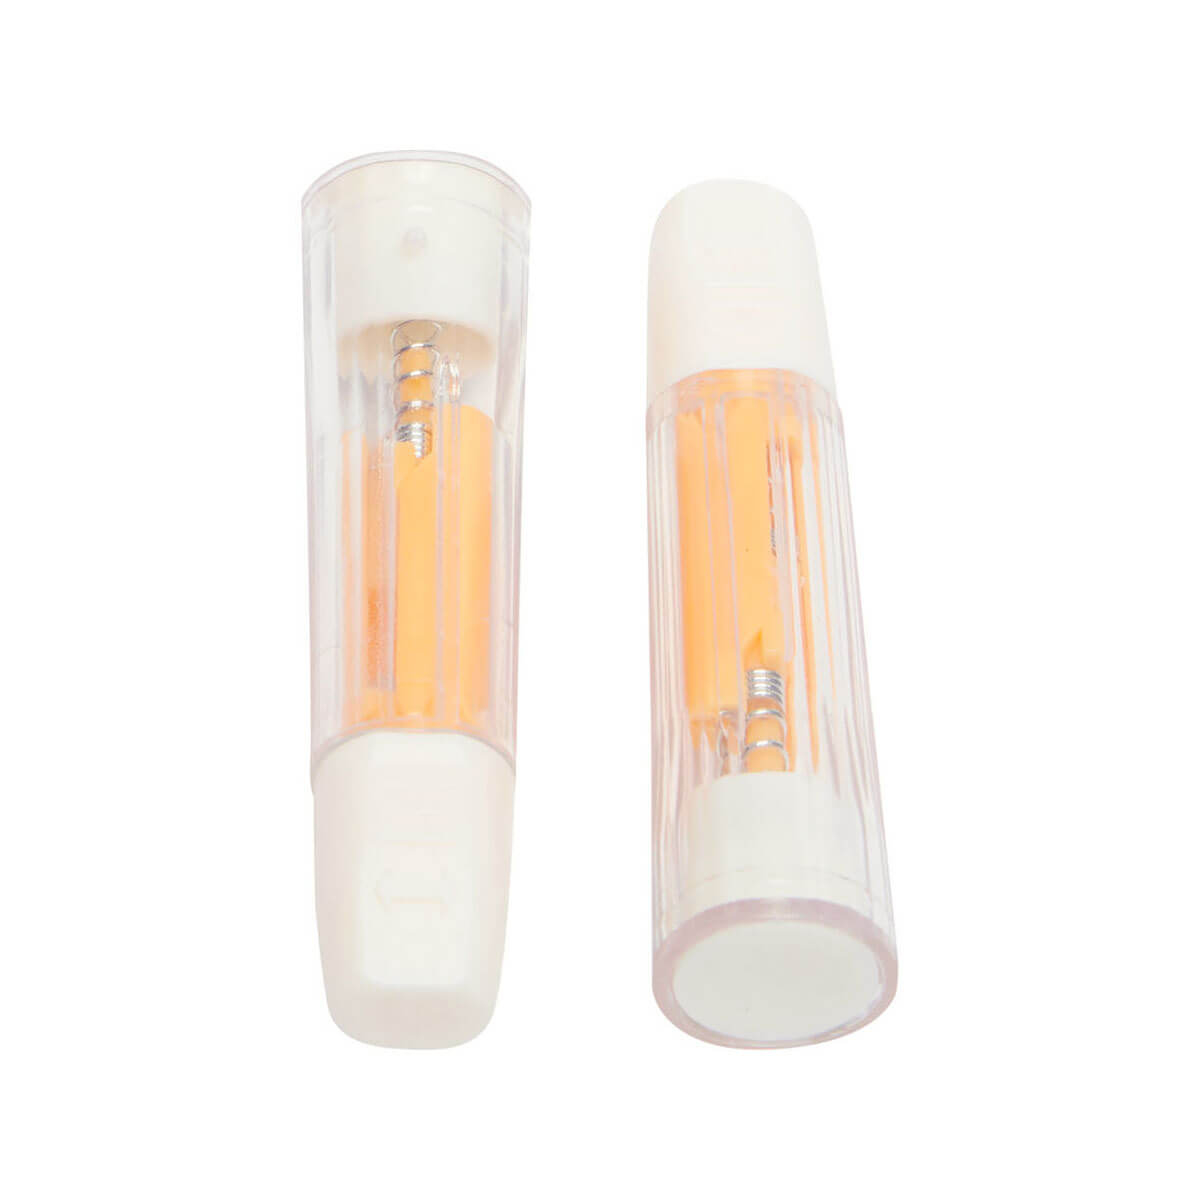 Ht-One 23G 1,8MM Safety Lancets